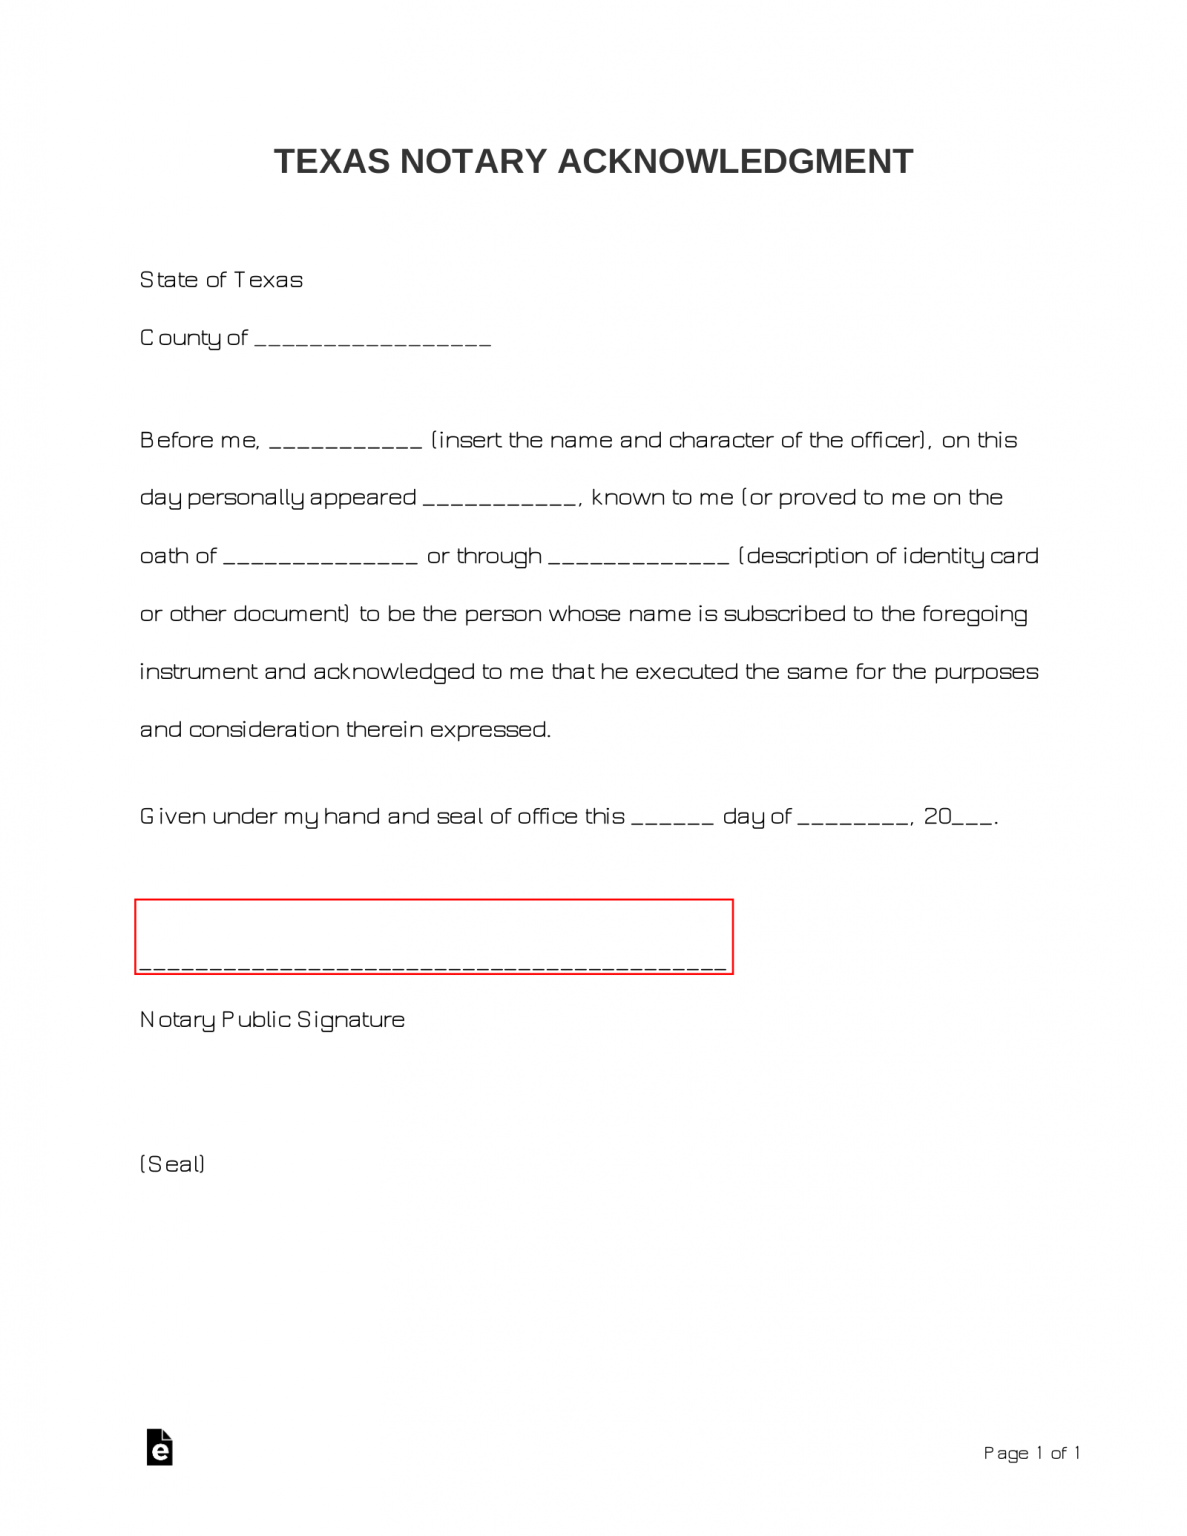 printable-notary-acknowledgement-form-printable-forms-free-online